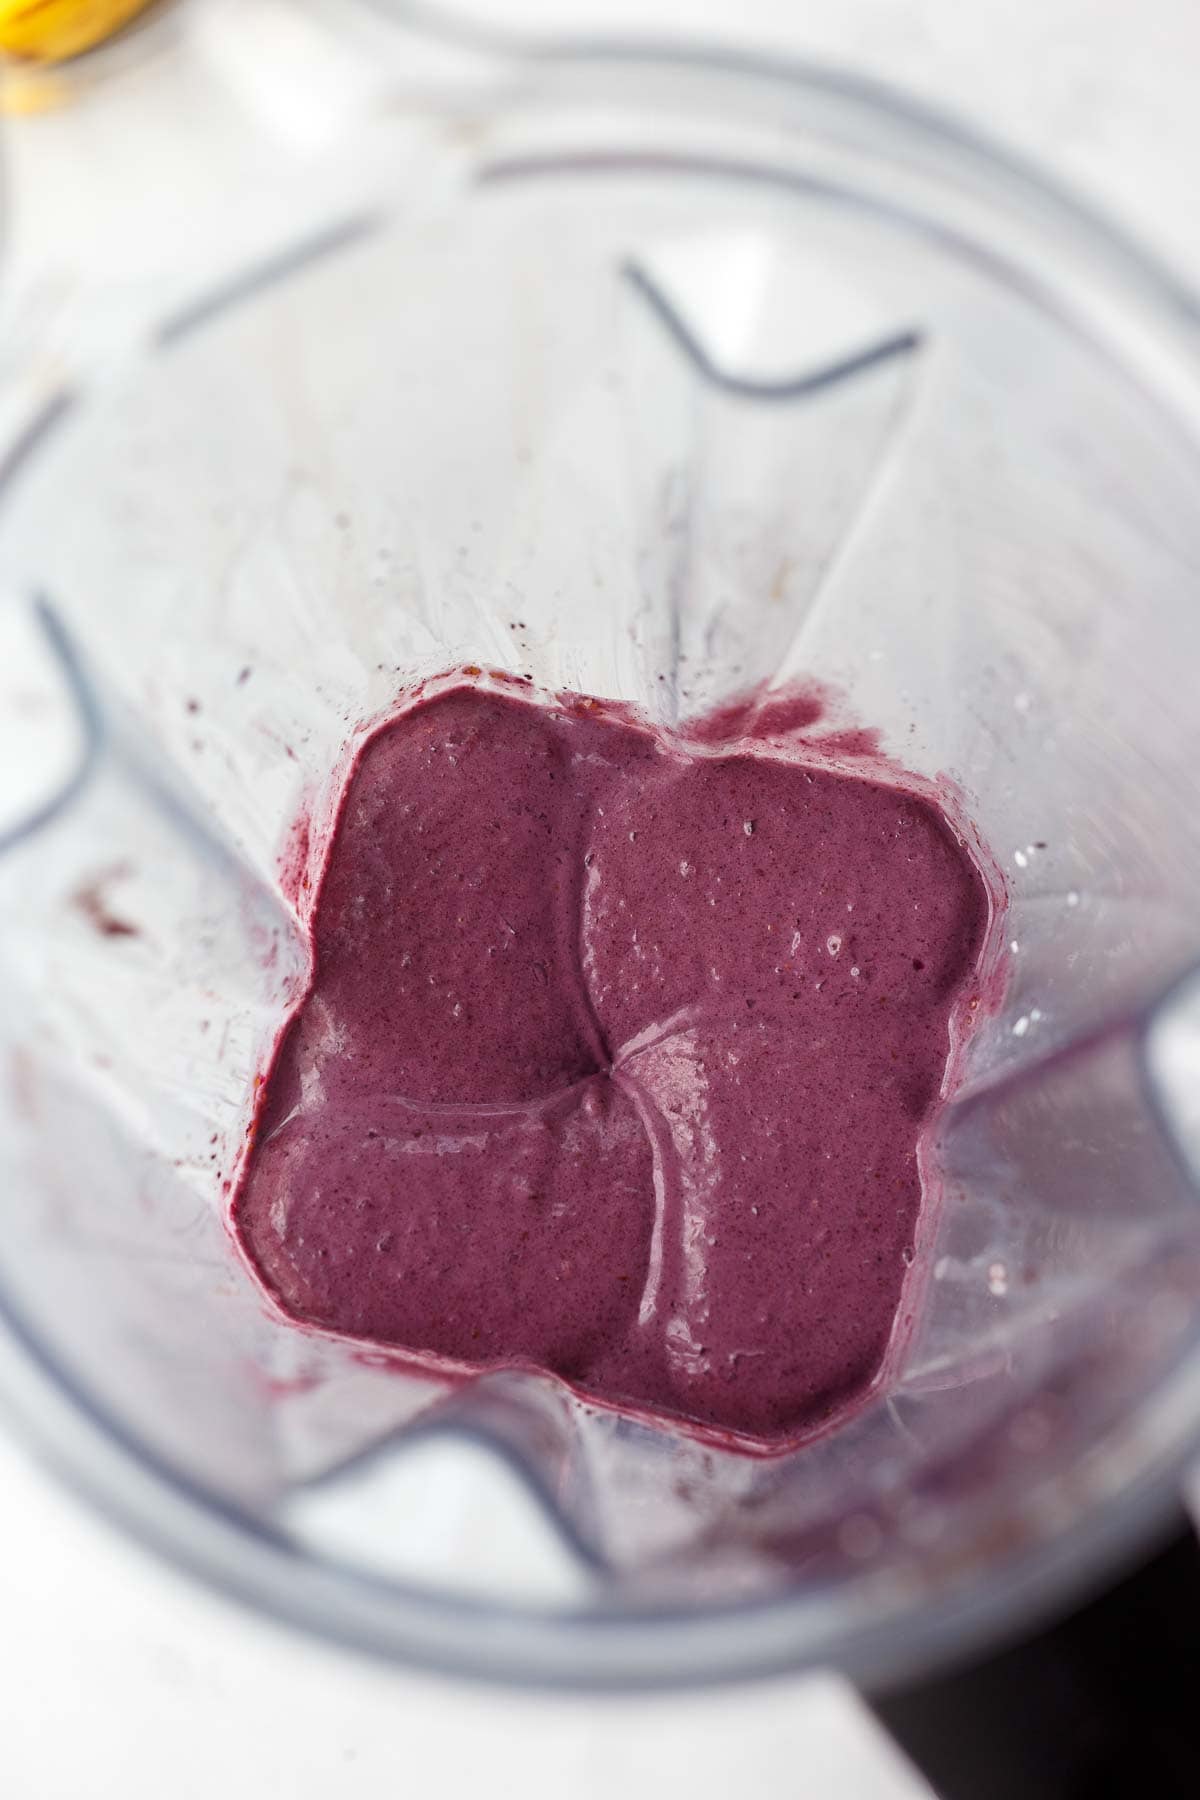 acai bowl blended into smooth, thick texture in blender.